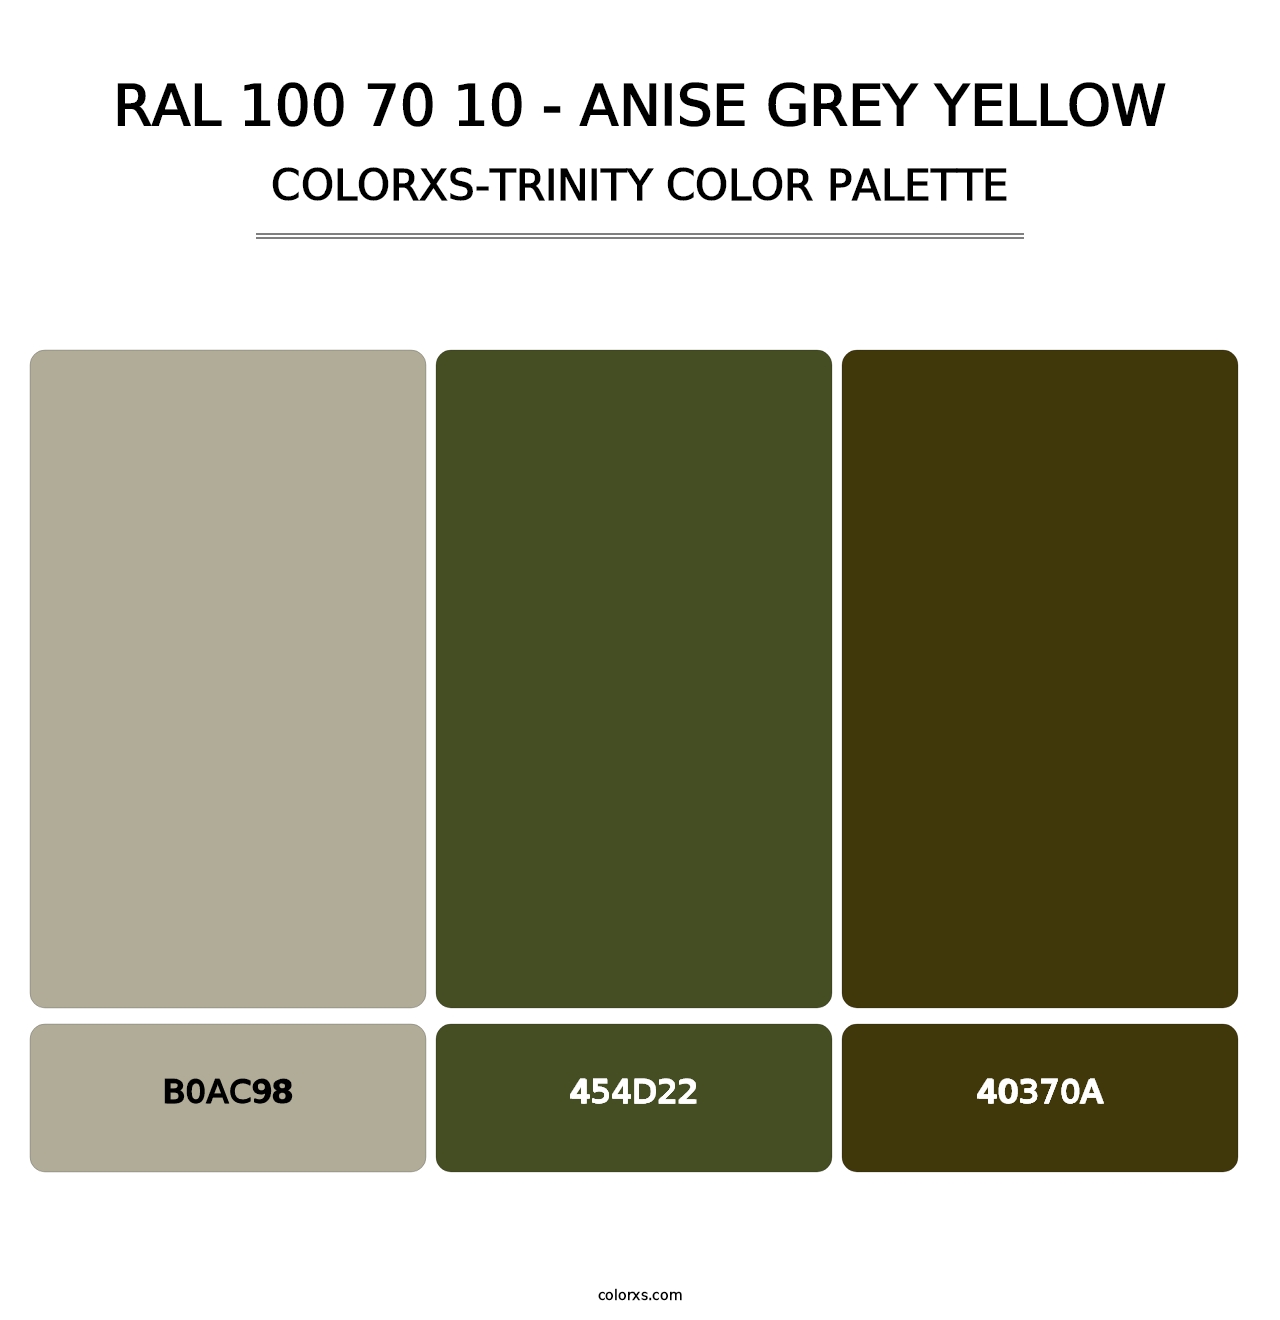 RAL 100 70 10 - Anise Grey Yellow - Colorxs Trinity Palette